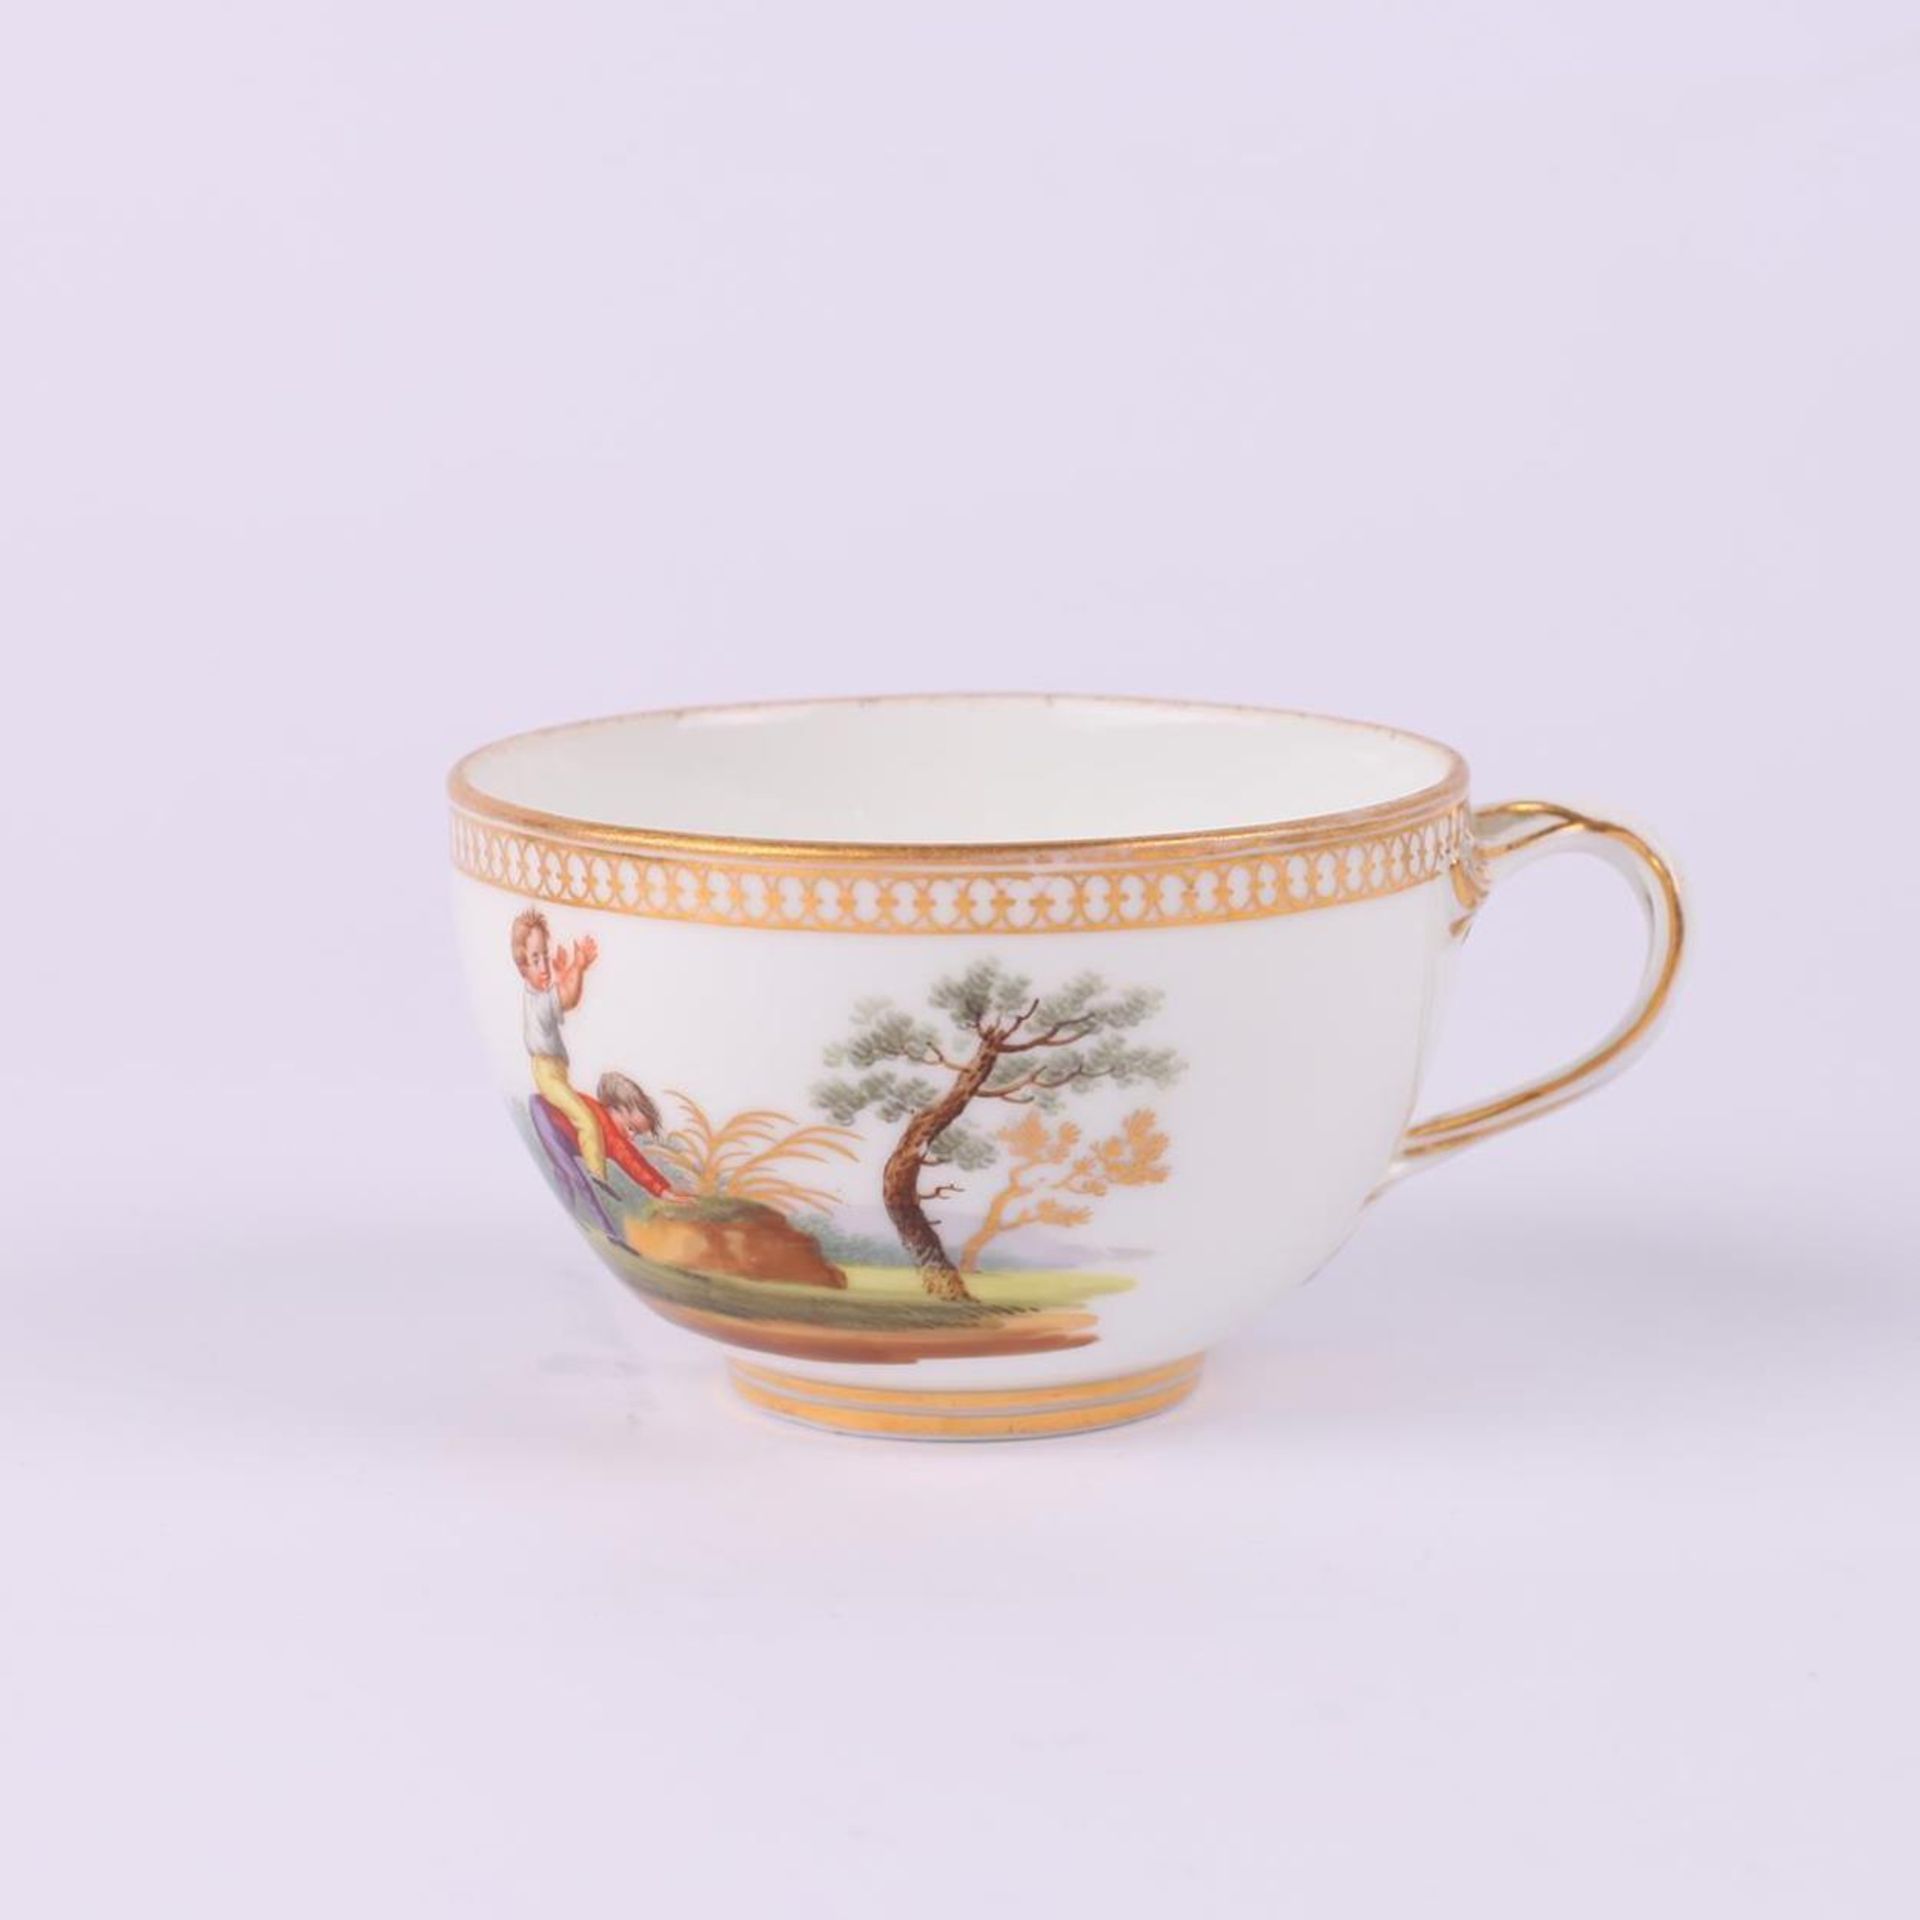 Two tea cup and saucer sets "A child's play". Popov. Moscow. 1850s. Porcelain, gilding, painting. - Bild 3 aus 8